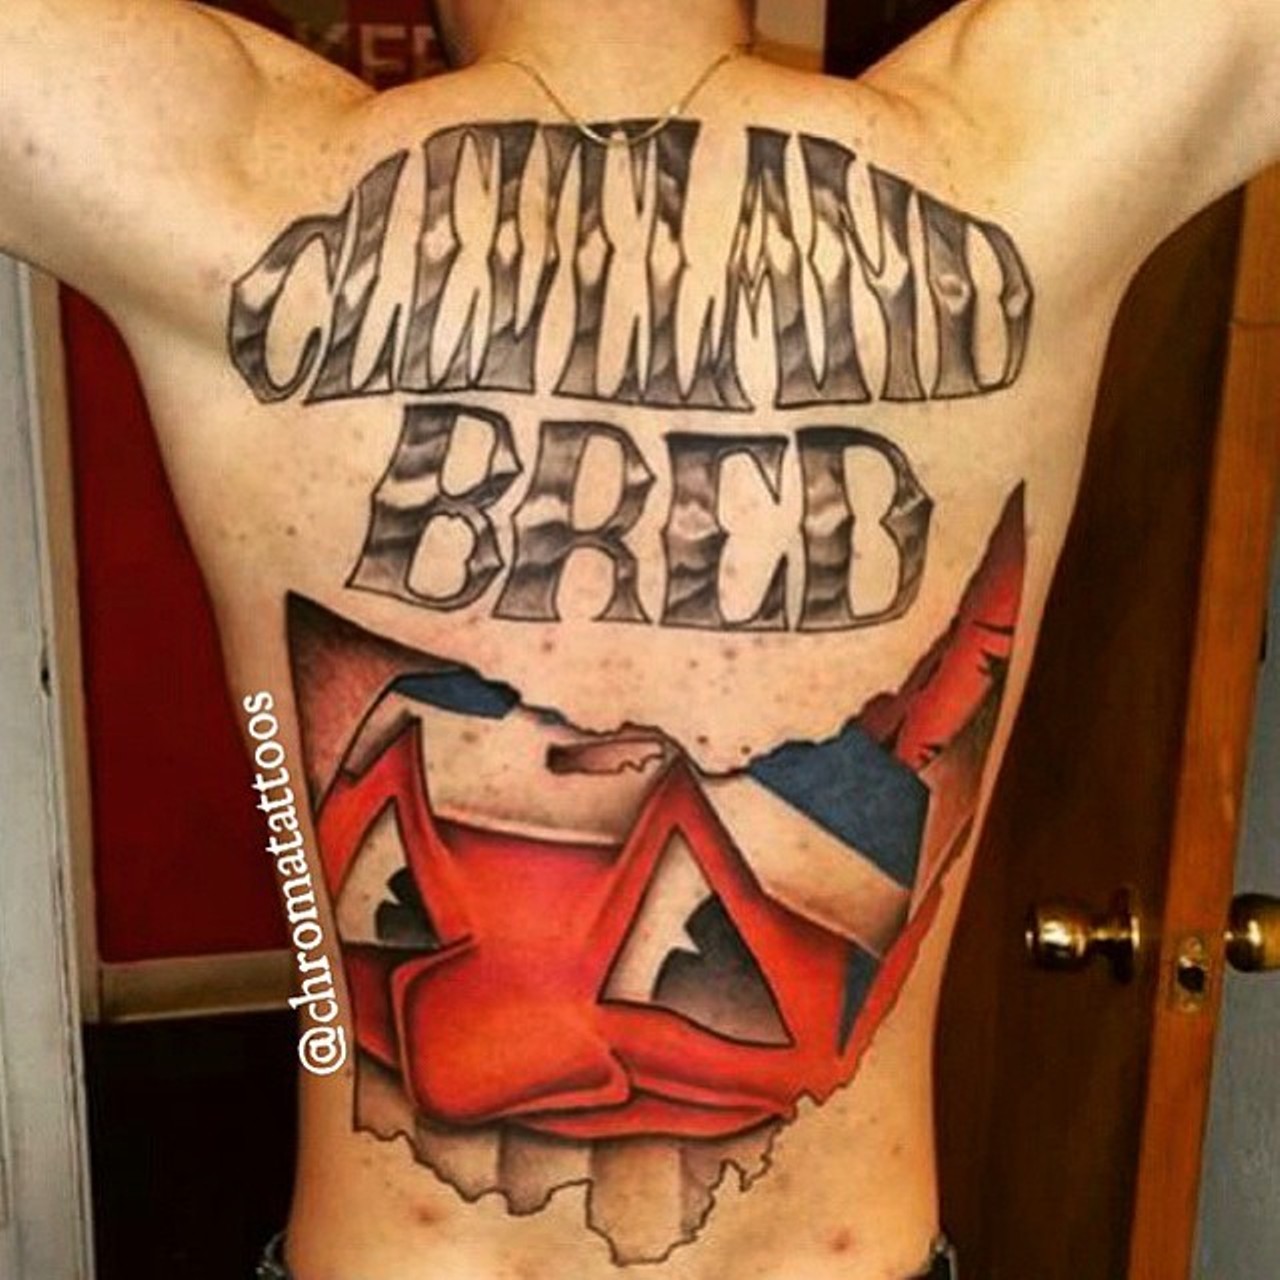 17 Awesome Tattoos from Cleveland's Biggest Fans, Cleveland